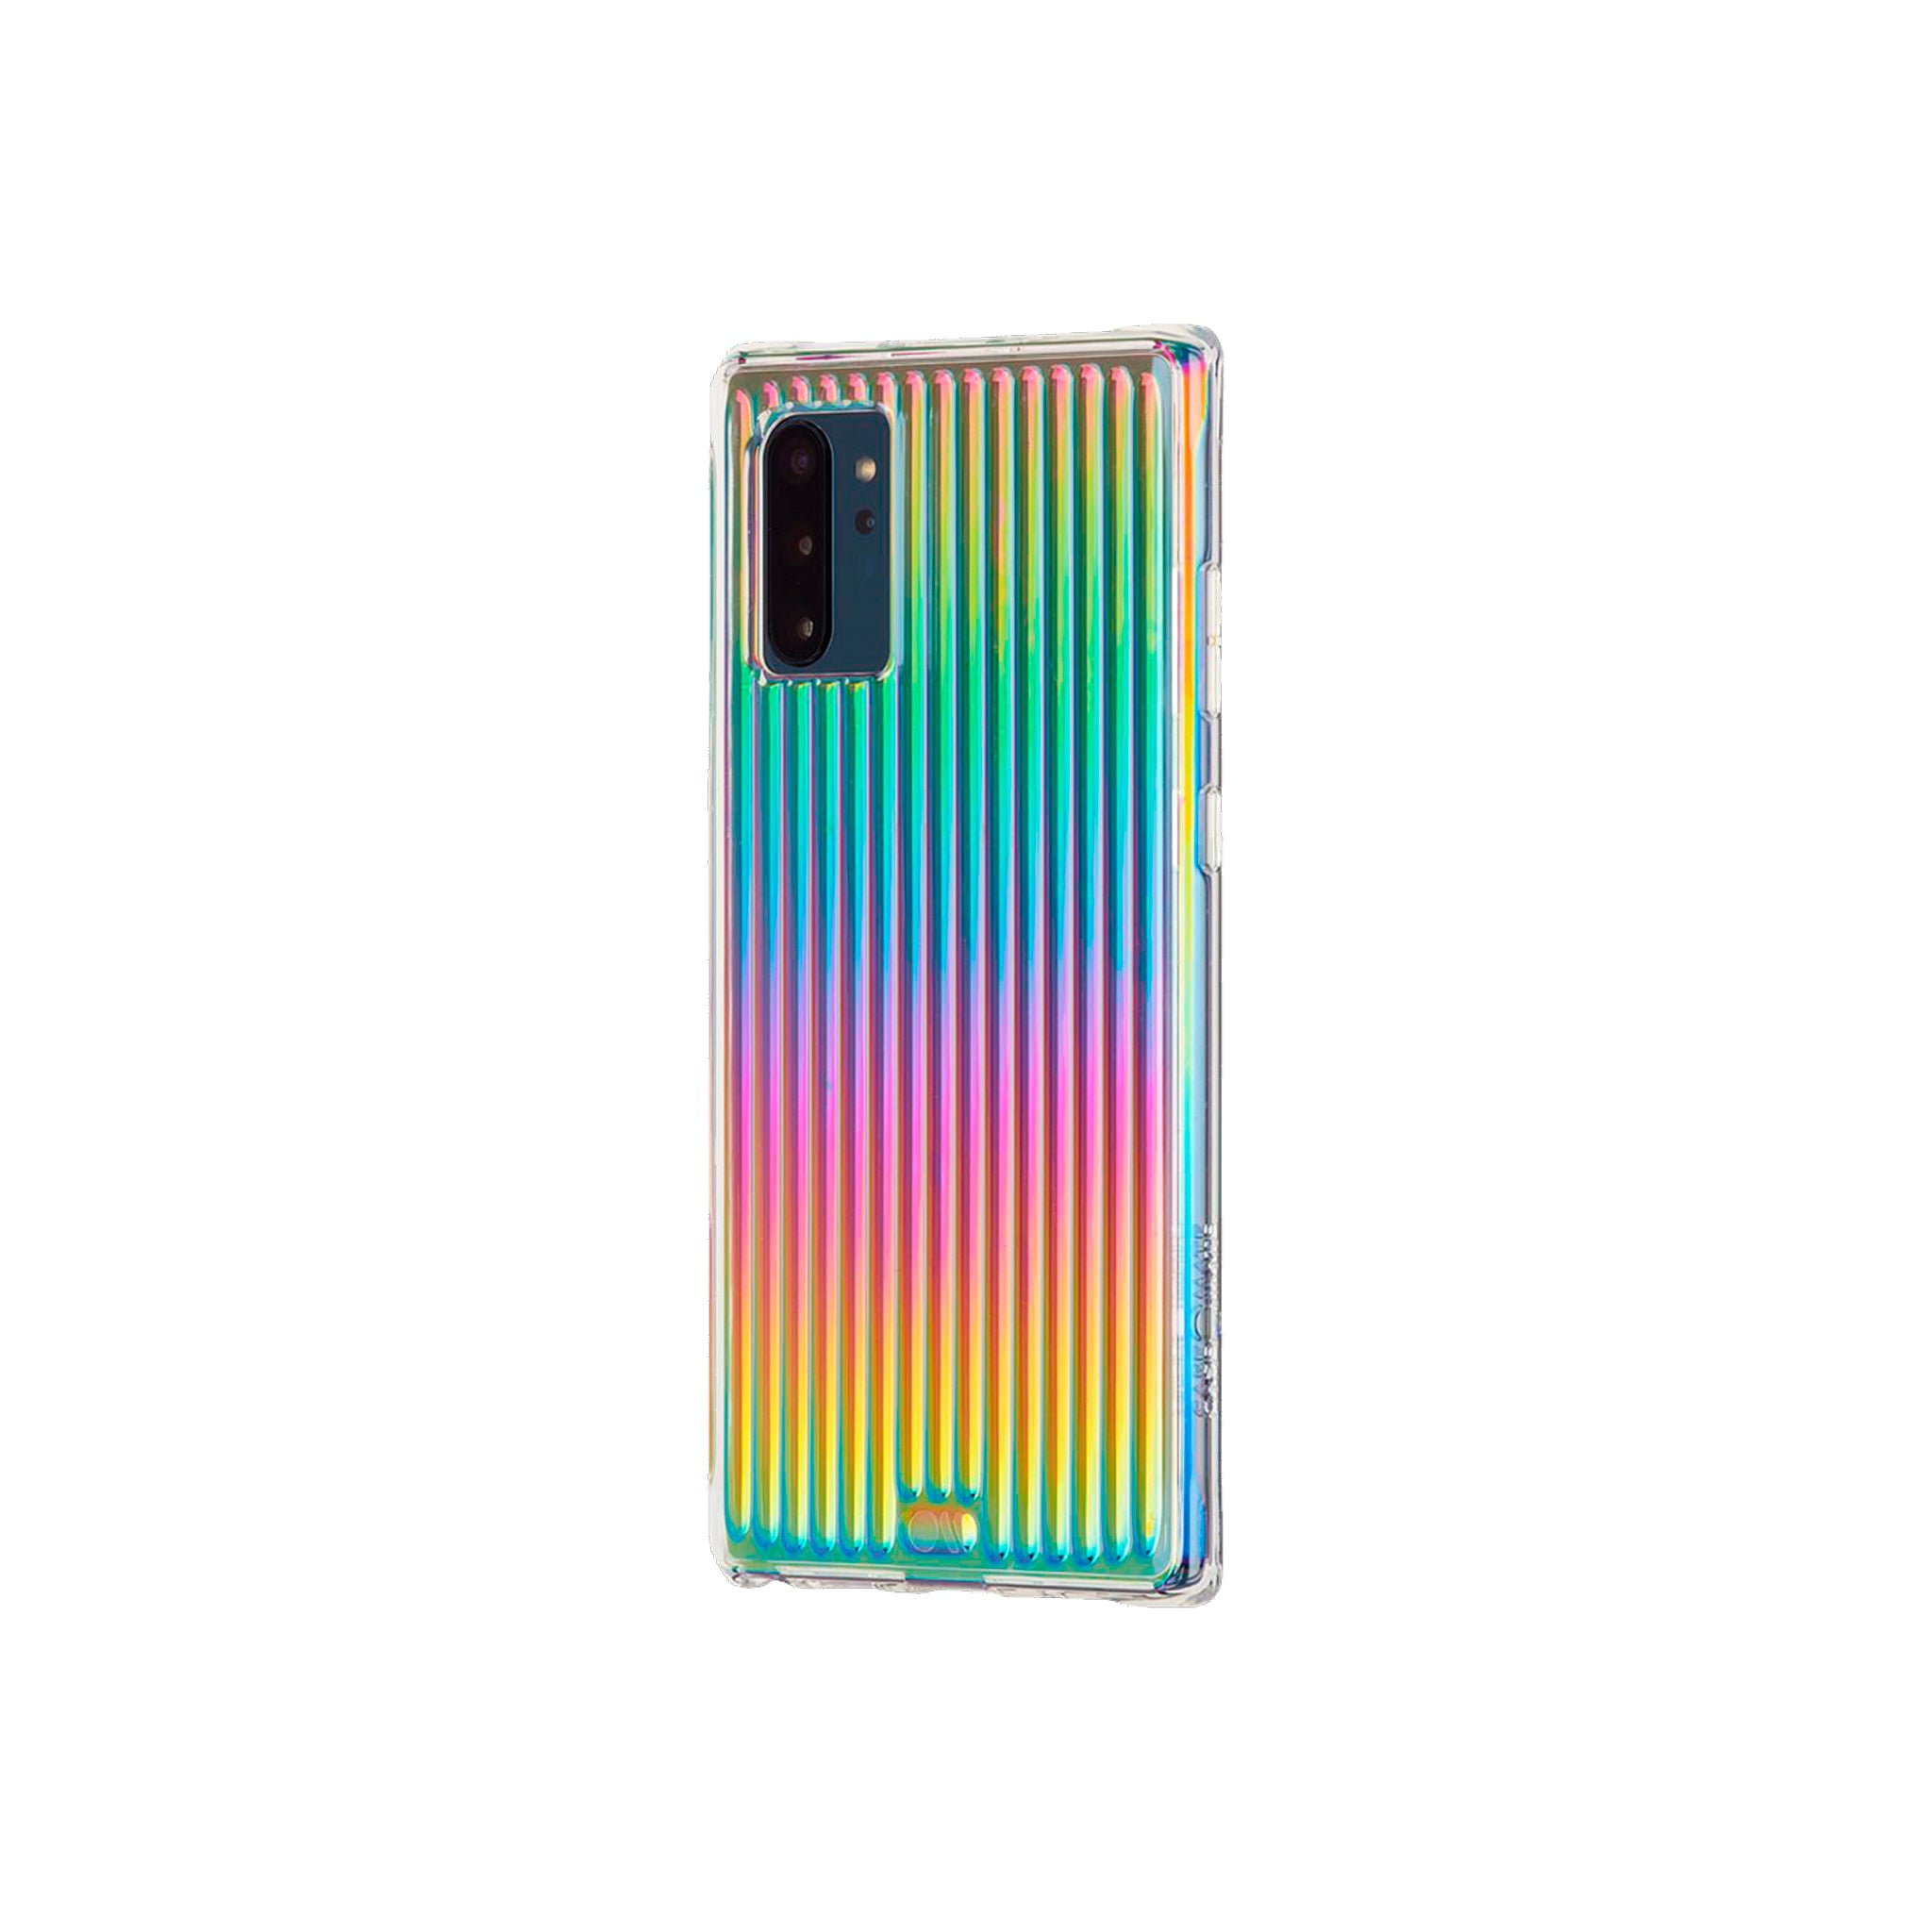 Case-mate - Tough Groove Case For Samsung Galaxy Note10 Plus - Iridescent